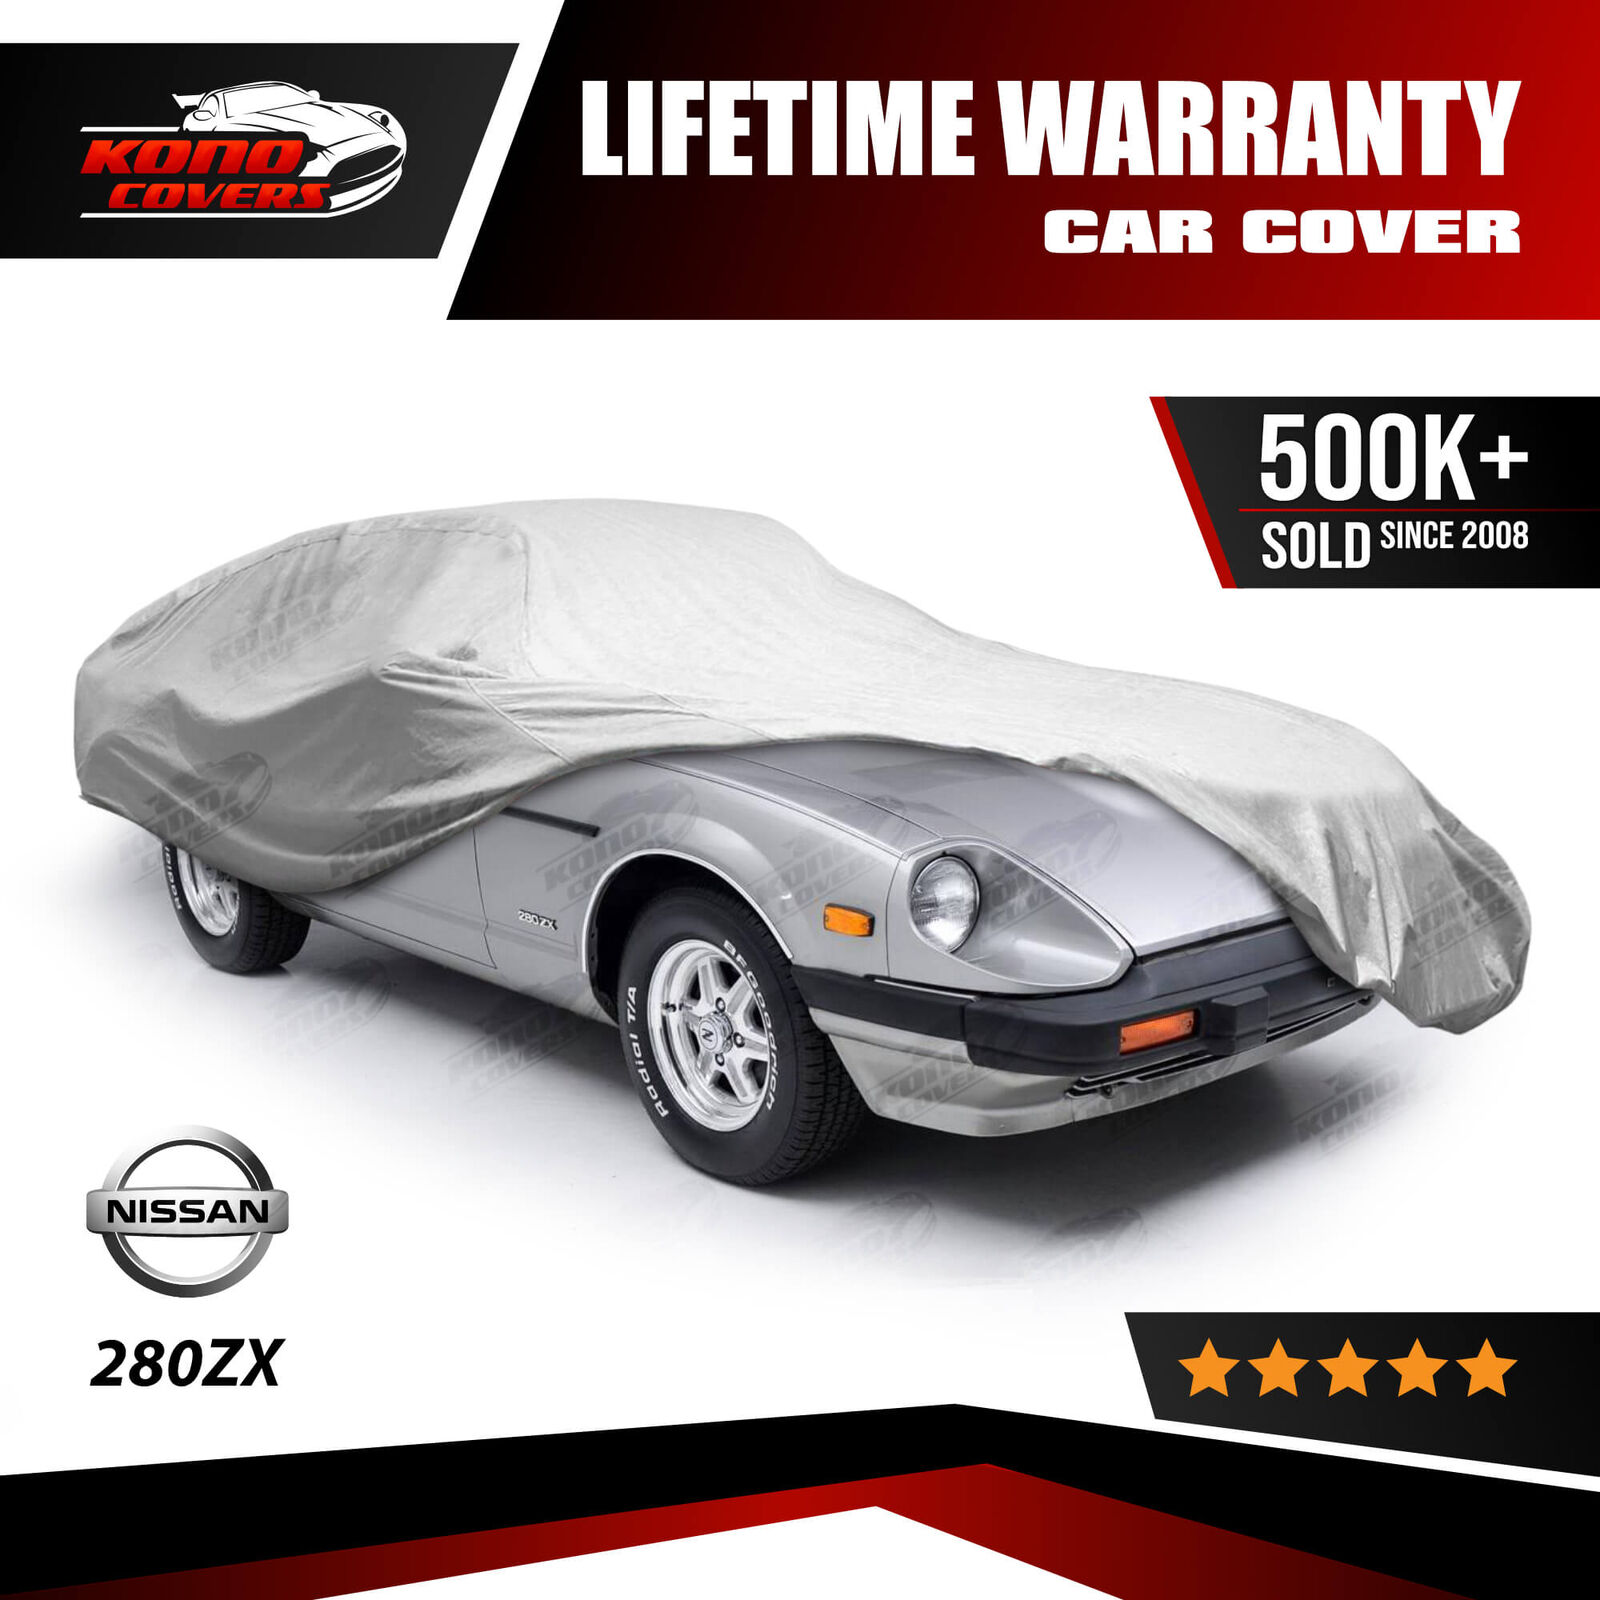 For Nissan 280Zx 5 Layer Waterproof Car Cover 1979 1980 1981 1982 1983